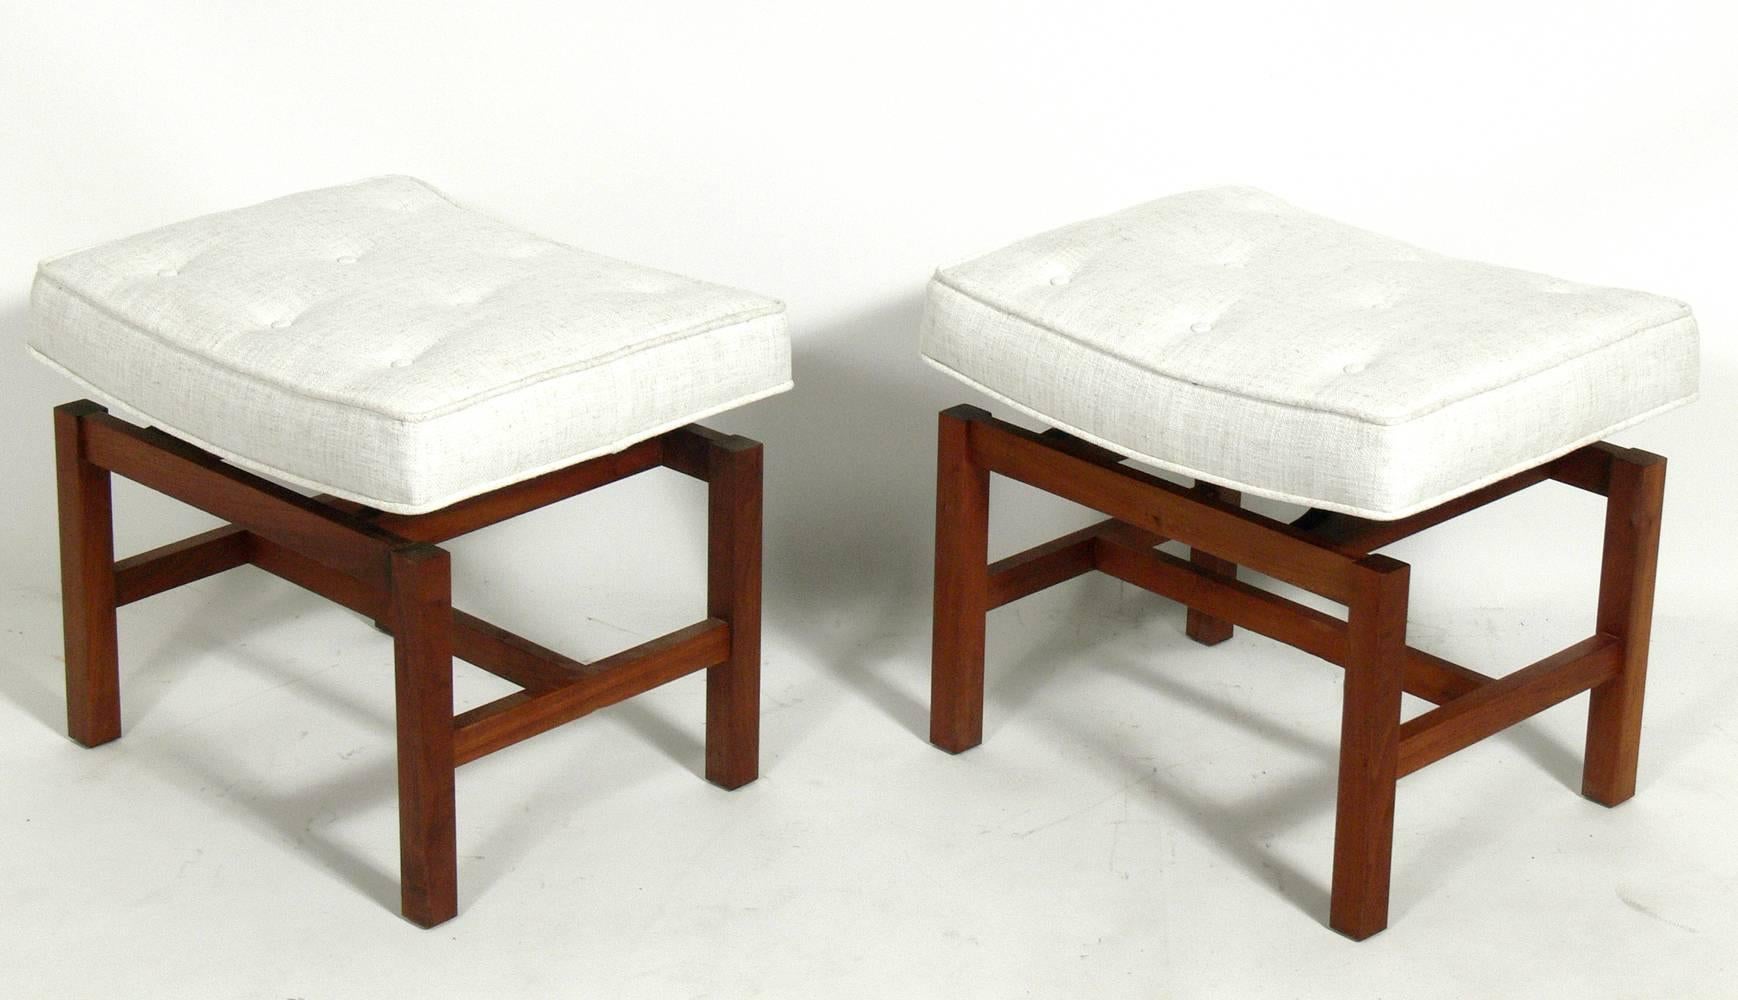 Pair of modern benches or stools, designed by Jens Risom, American, circa 1960s. Curvaceous 